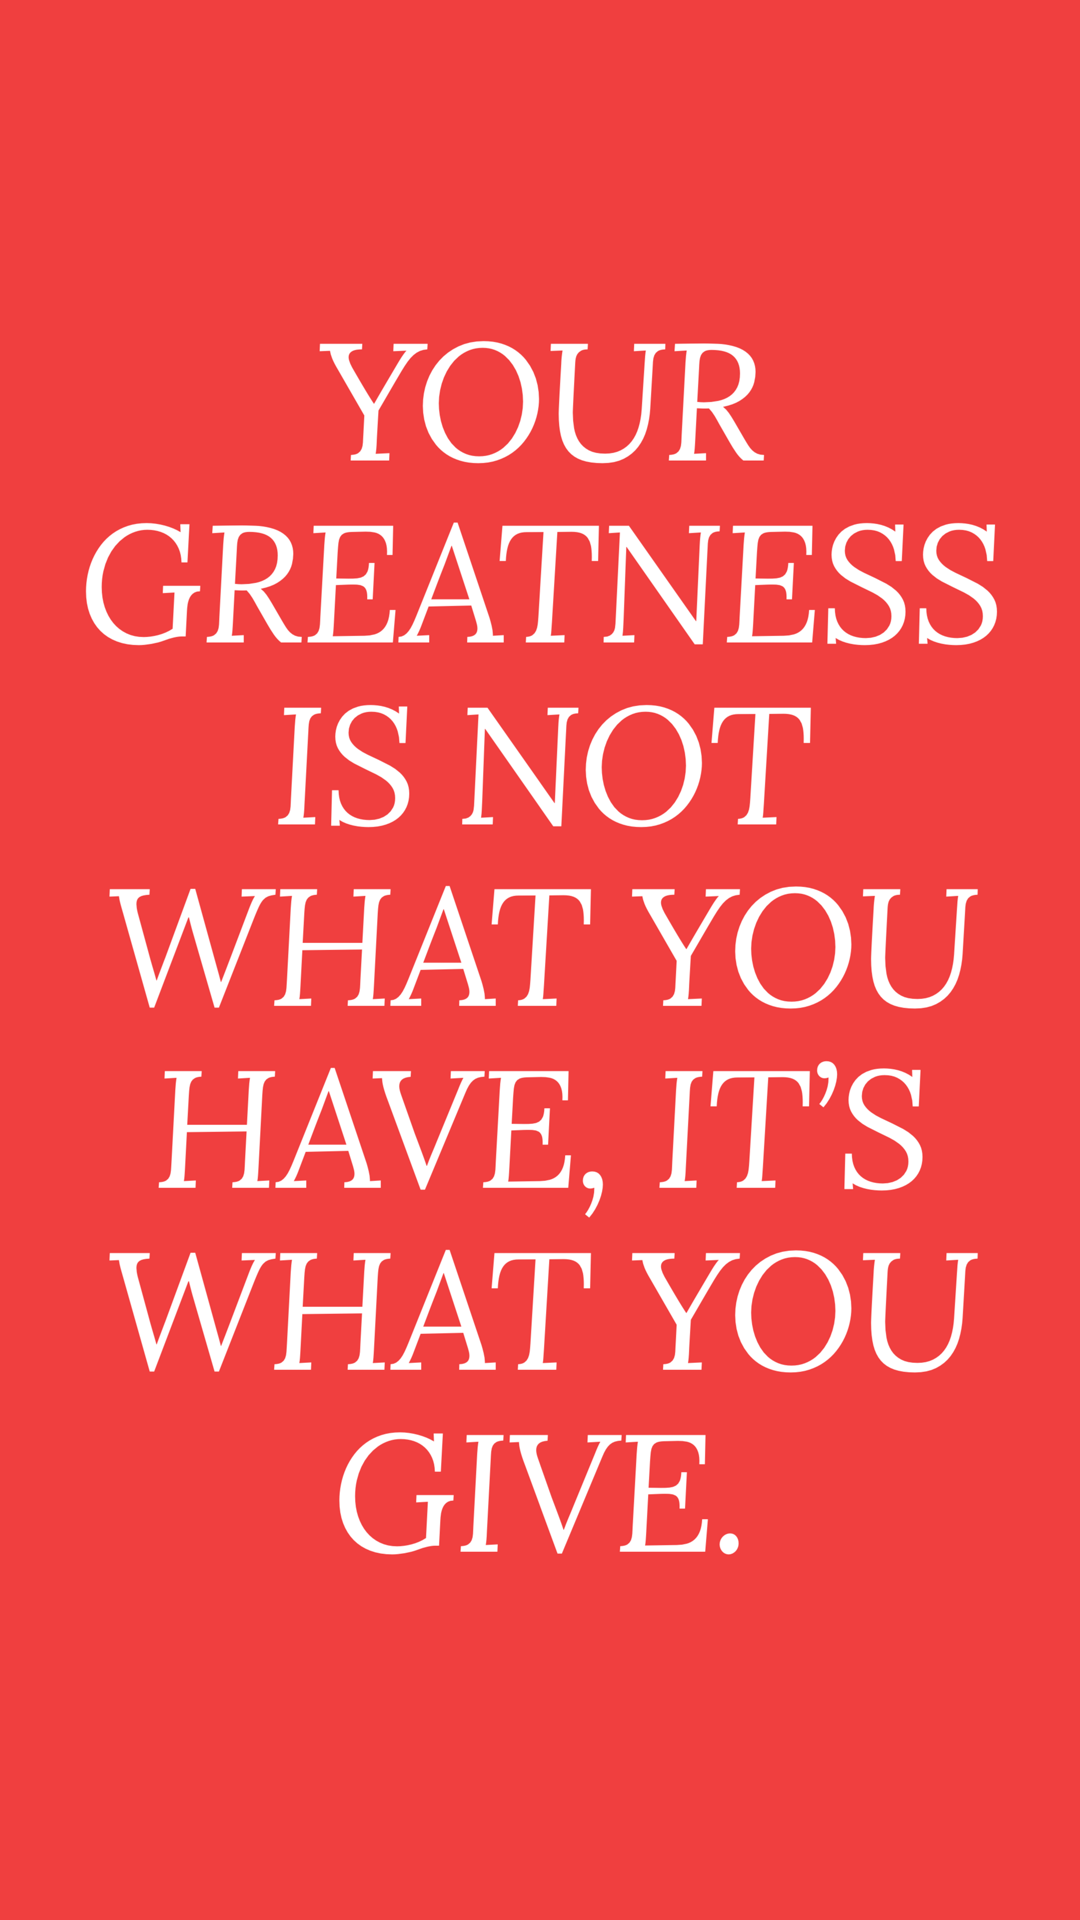 your greatness is not what you have it’s what you give